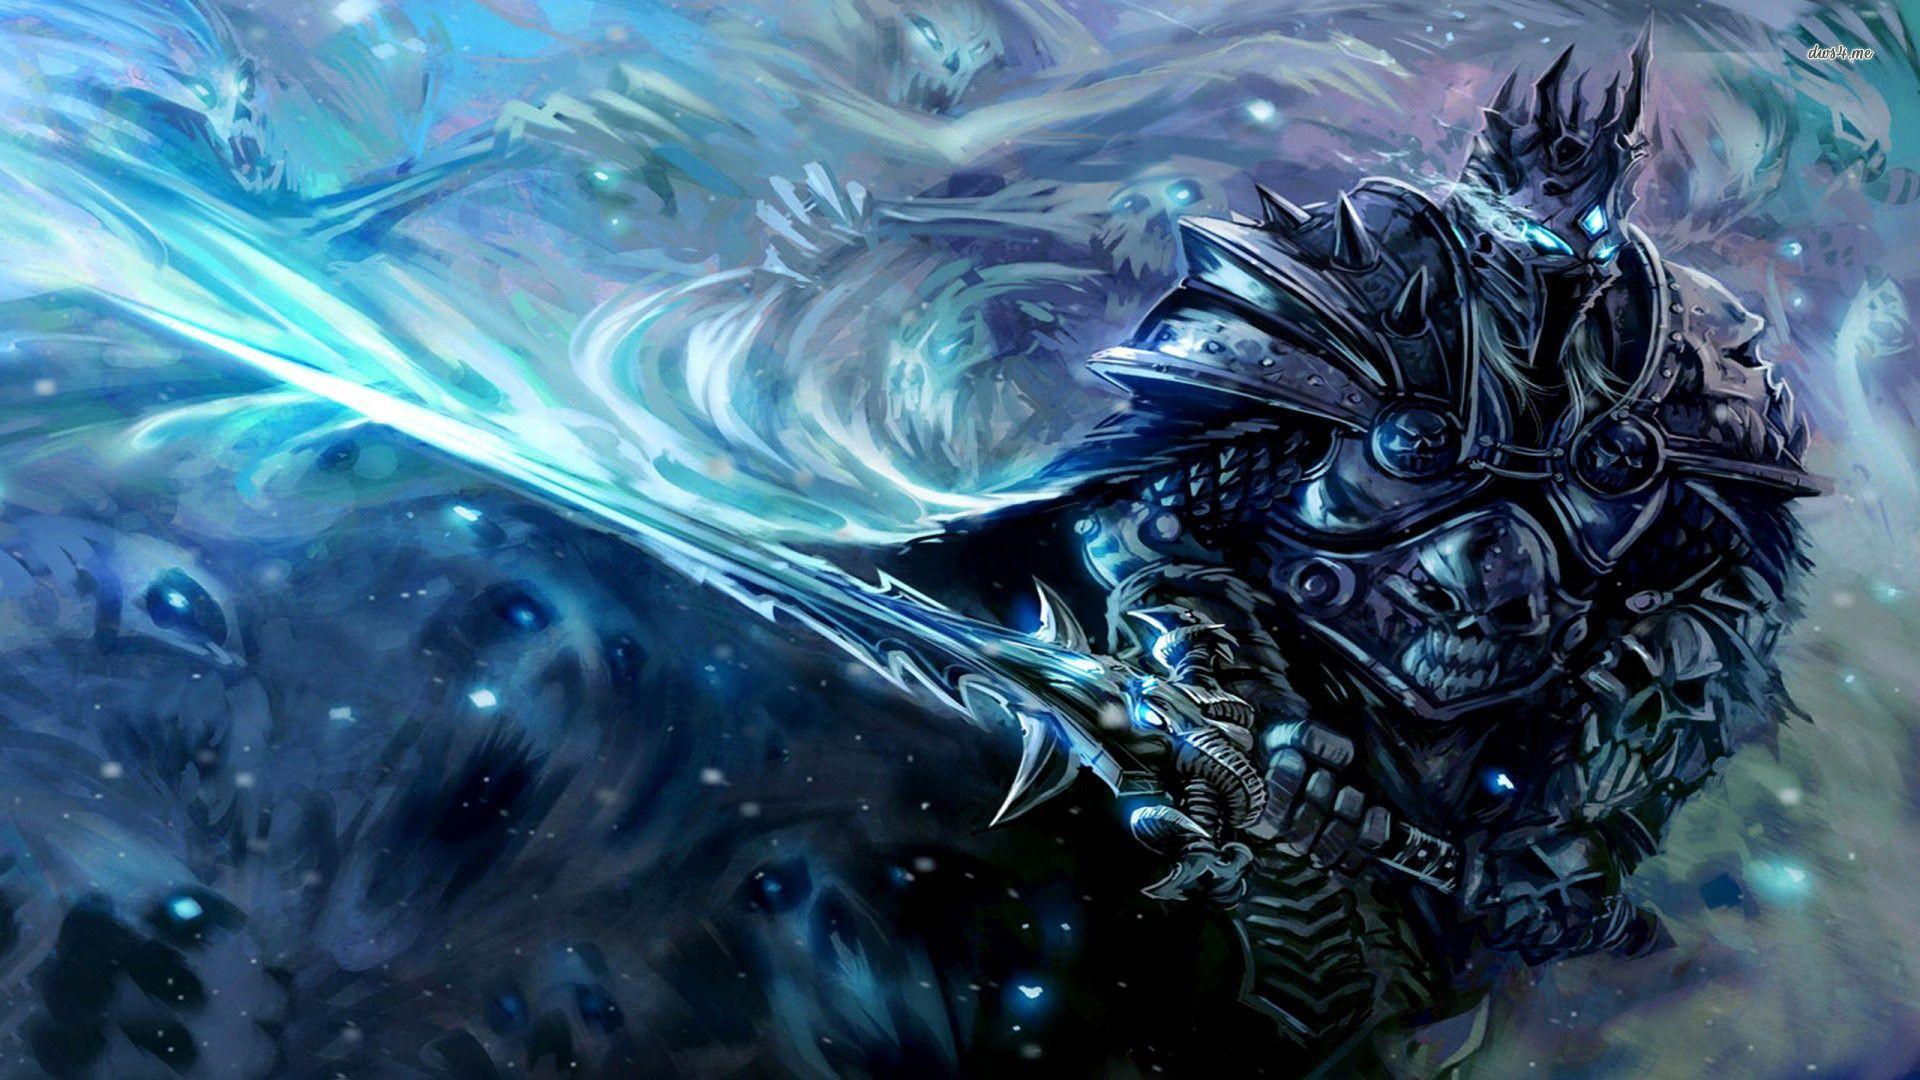 Beautiful Lich King Wallpaper Group 83. Cingular Mobile Solutions